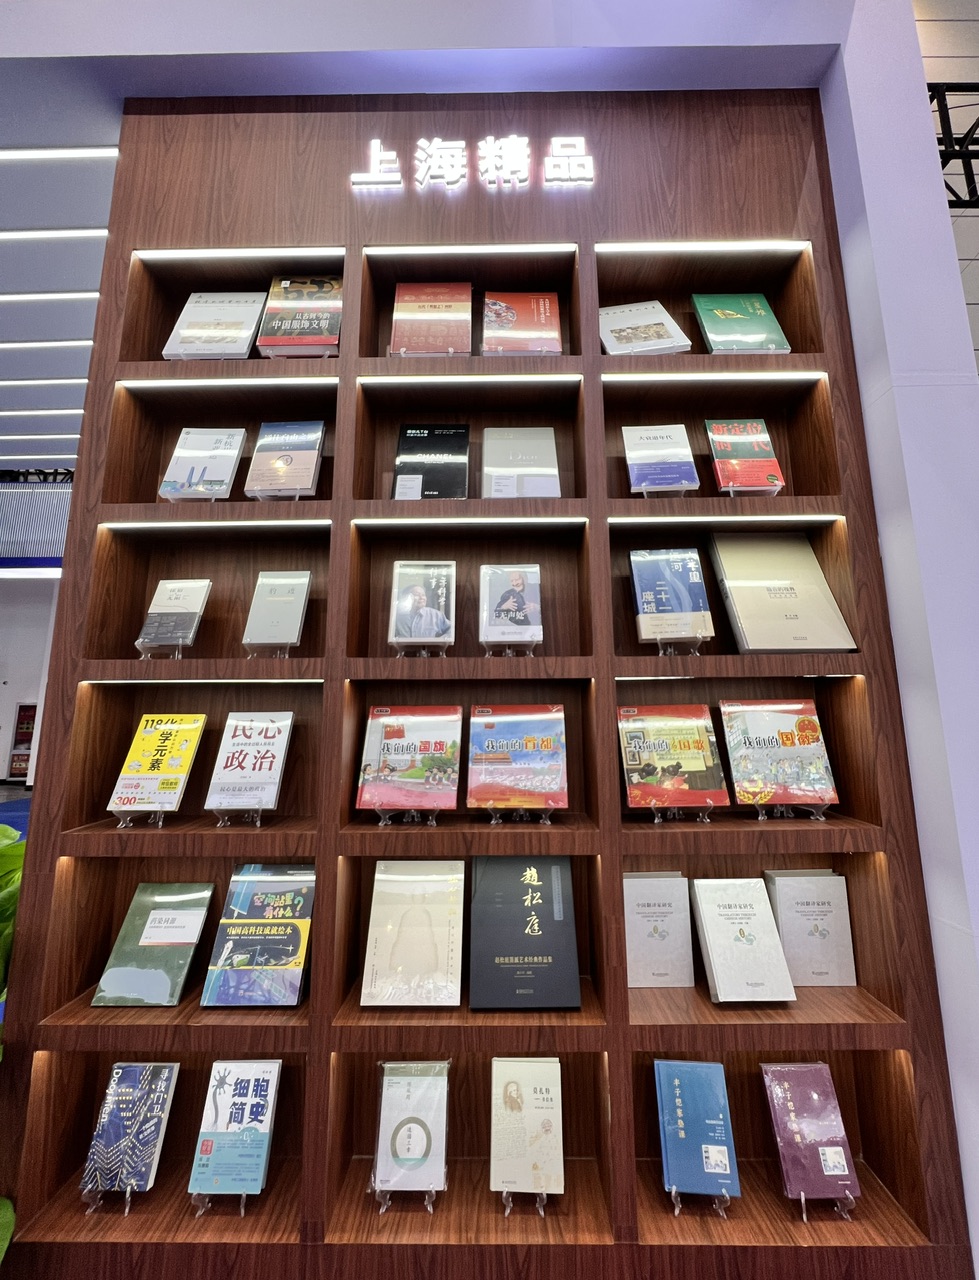 The Shanghai delegation made an appearance at the National Book Trading Expo, featuring books, exhibitions, and coffee socialism | exhibition area | books